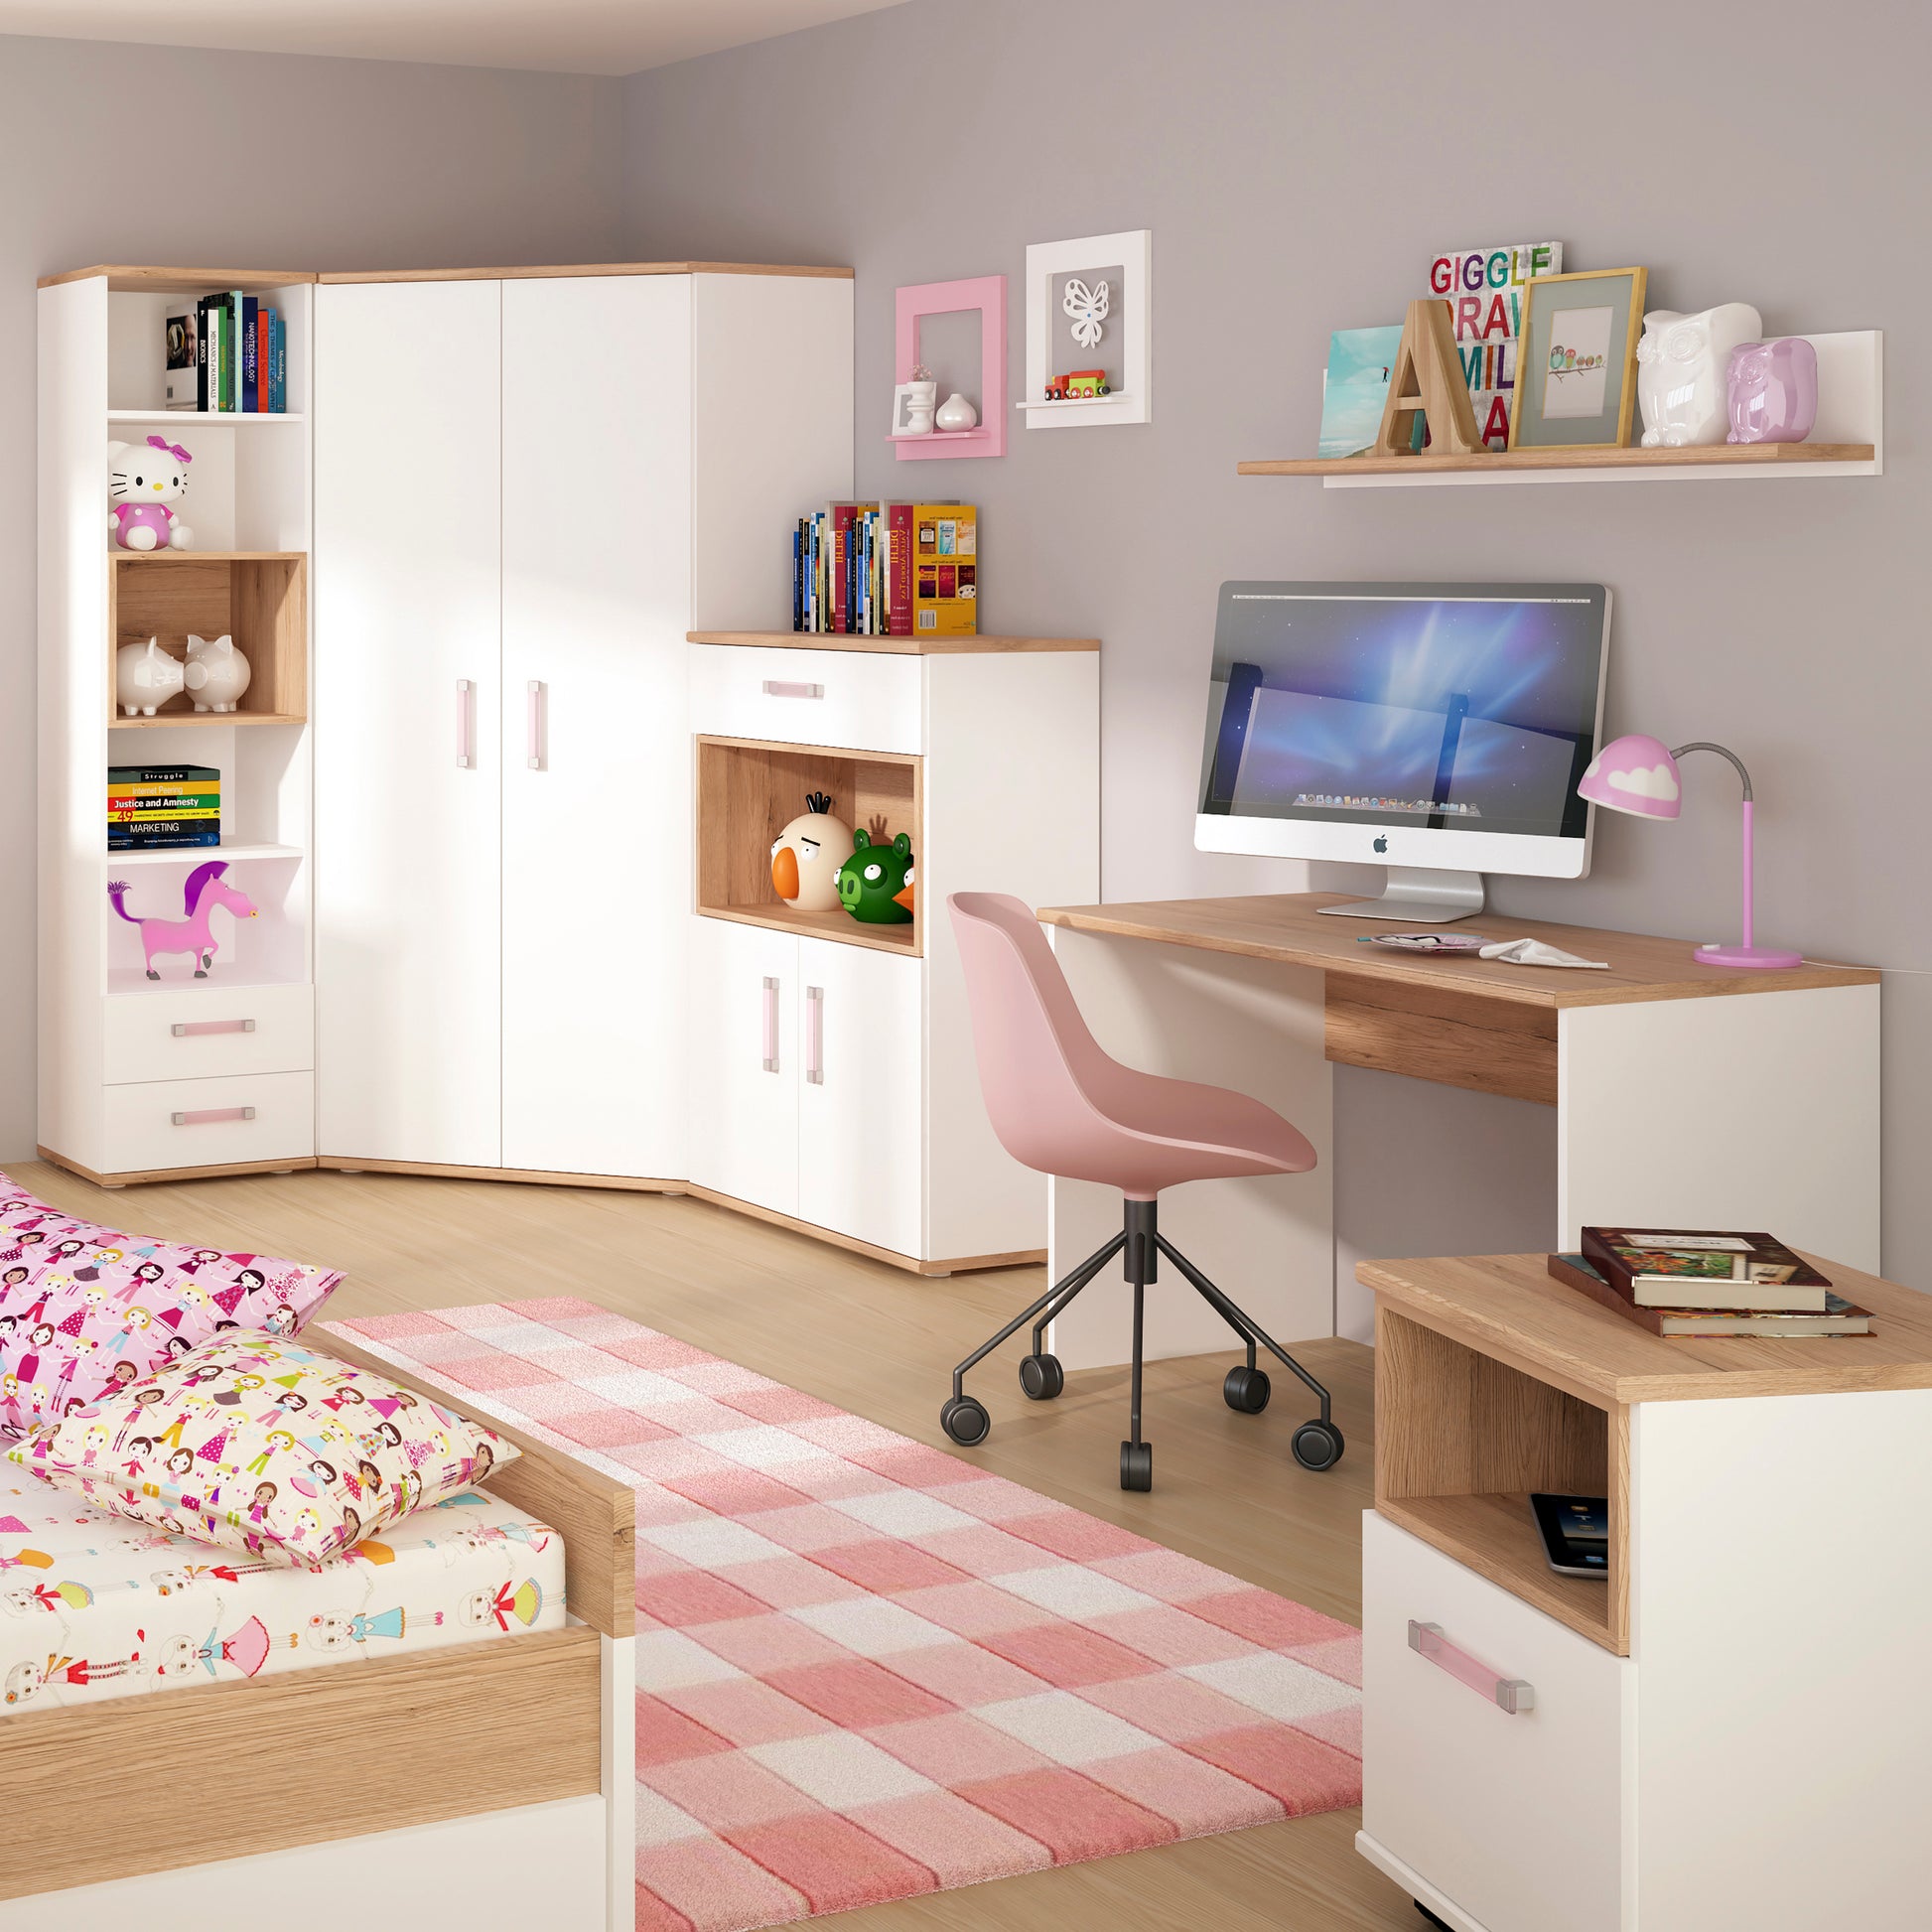 4Kids  2 Door 1 Drawer Cupboard with open shelf in Light Oak and white High Gloss (lilac handles)